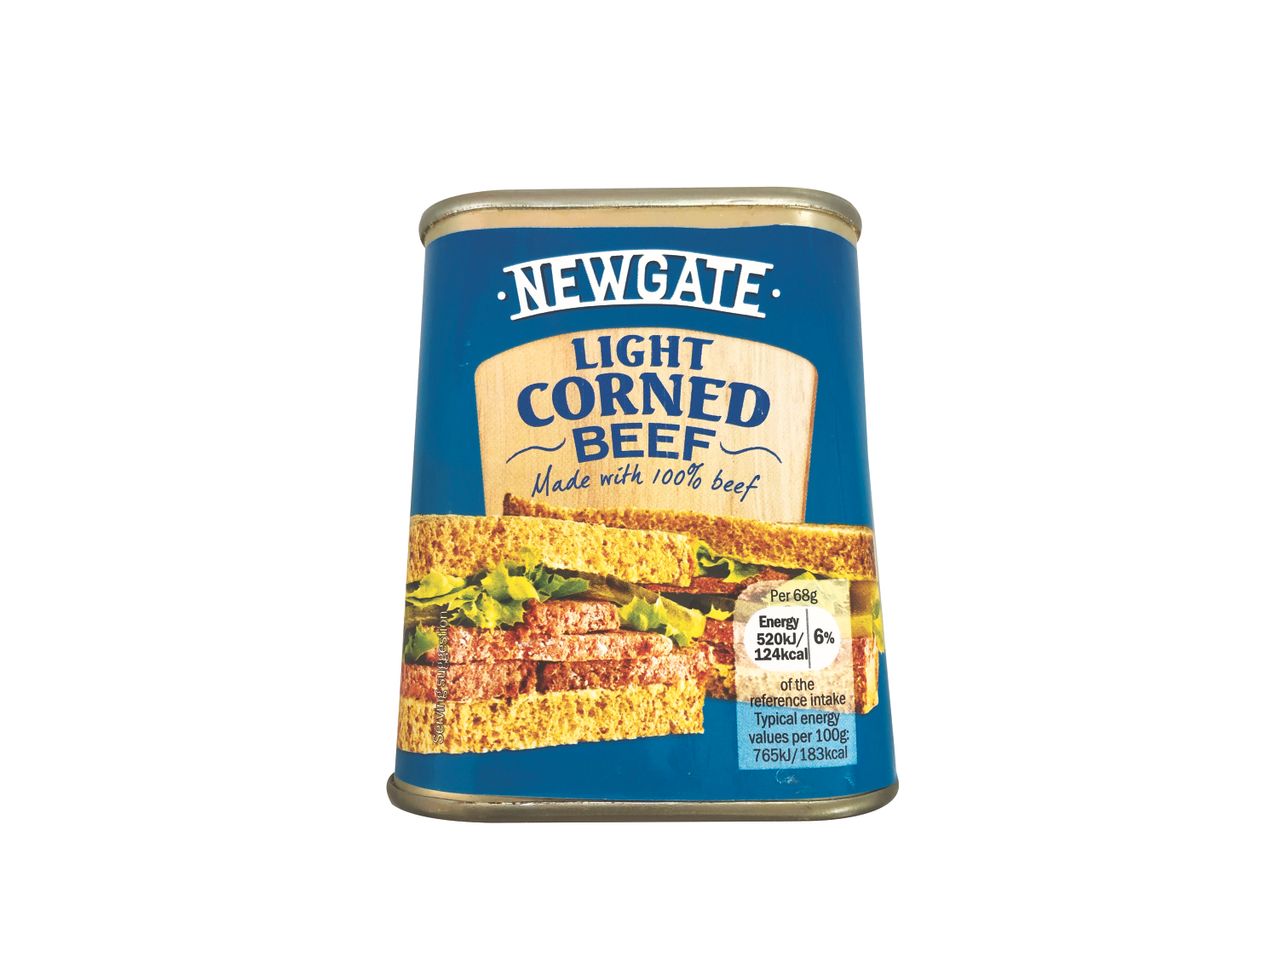 Go to full screen view: Light Corned Beef - Image 1